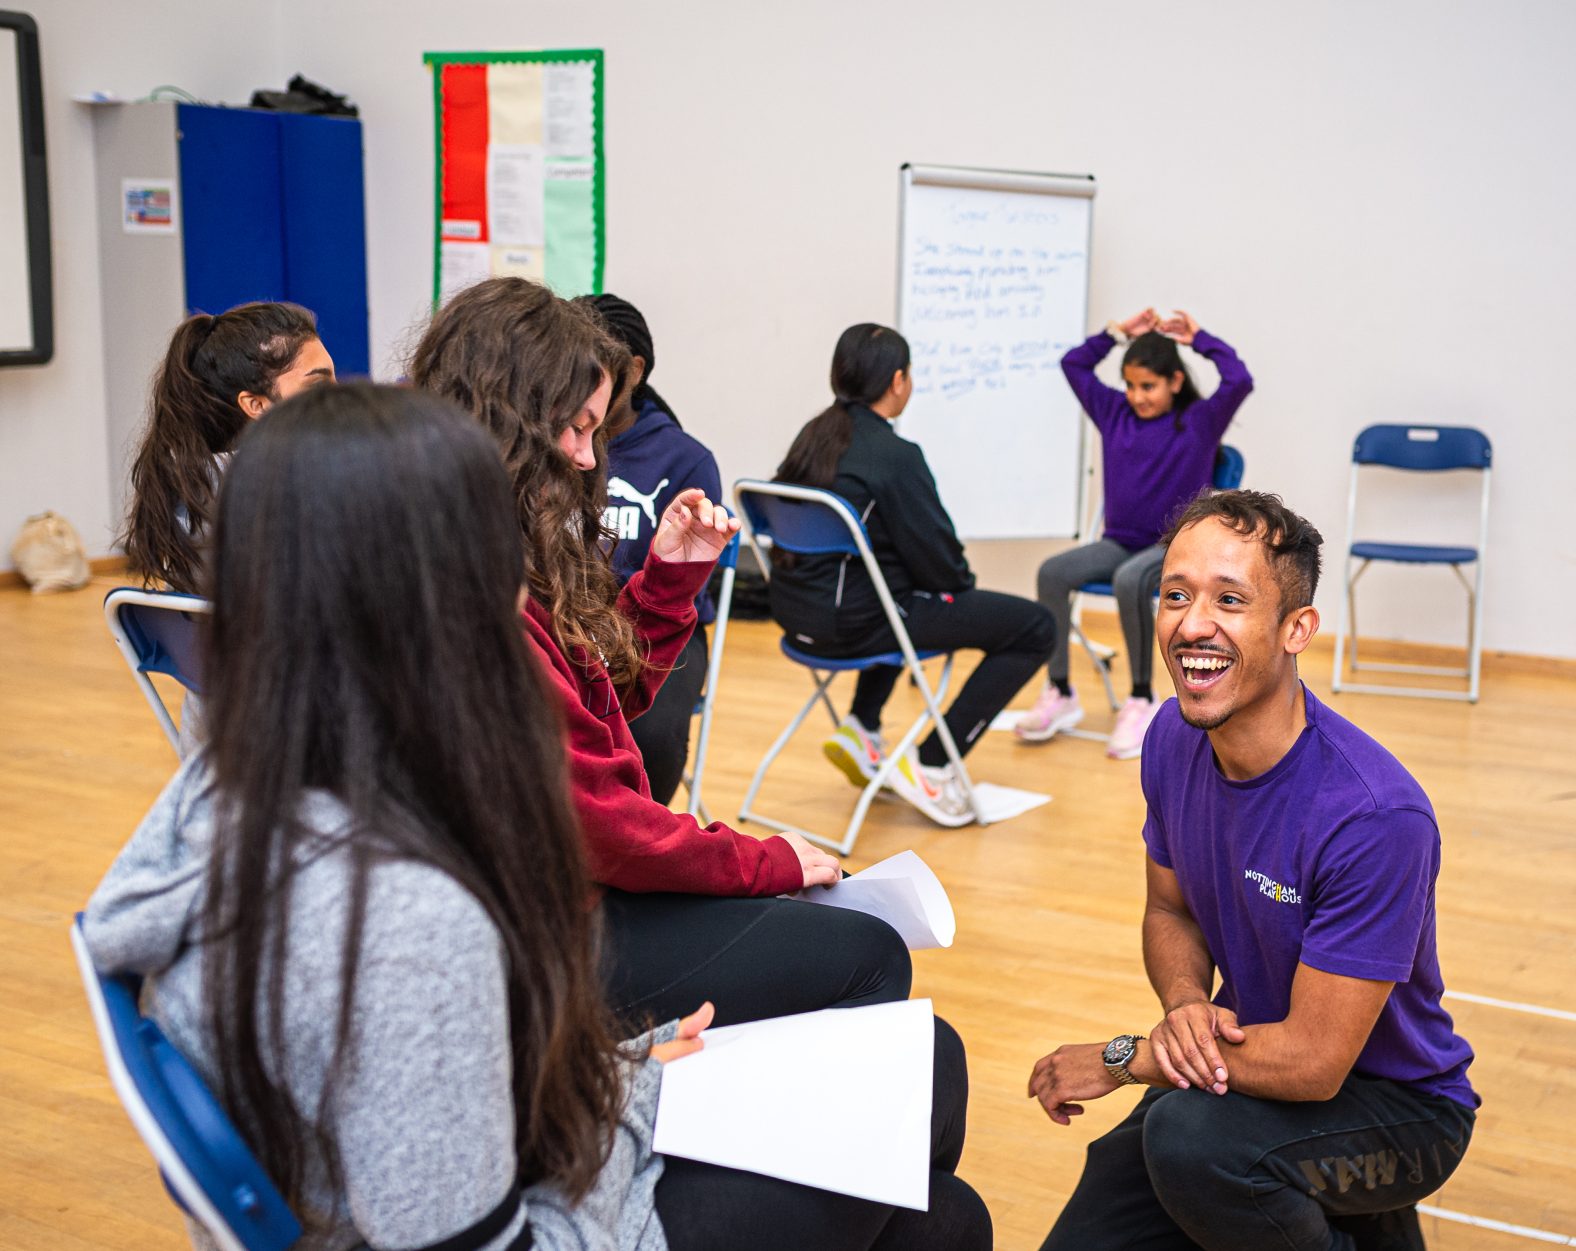 About SHINE - Nottingham Playhouse's flagship outreach programme